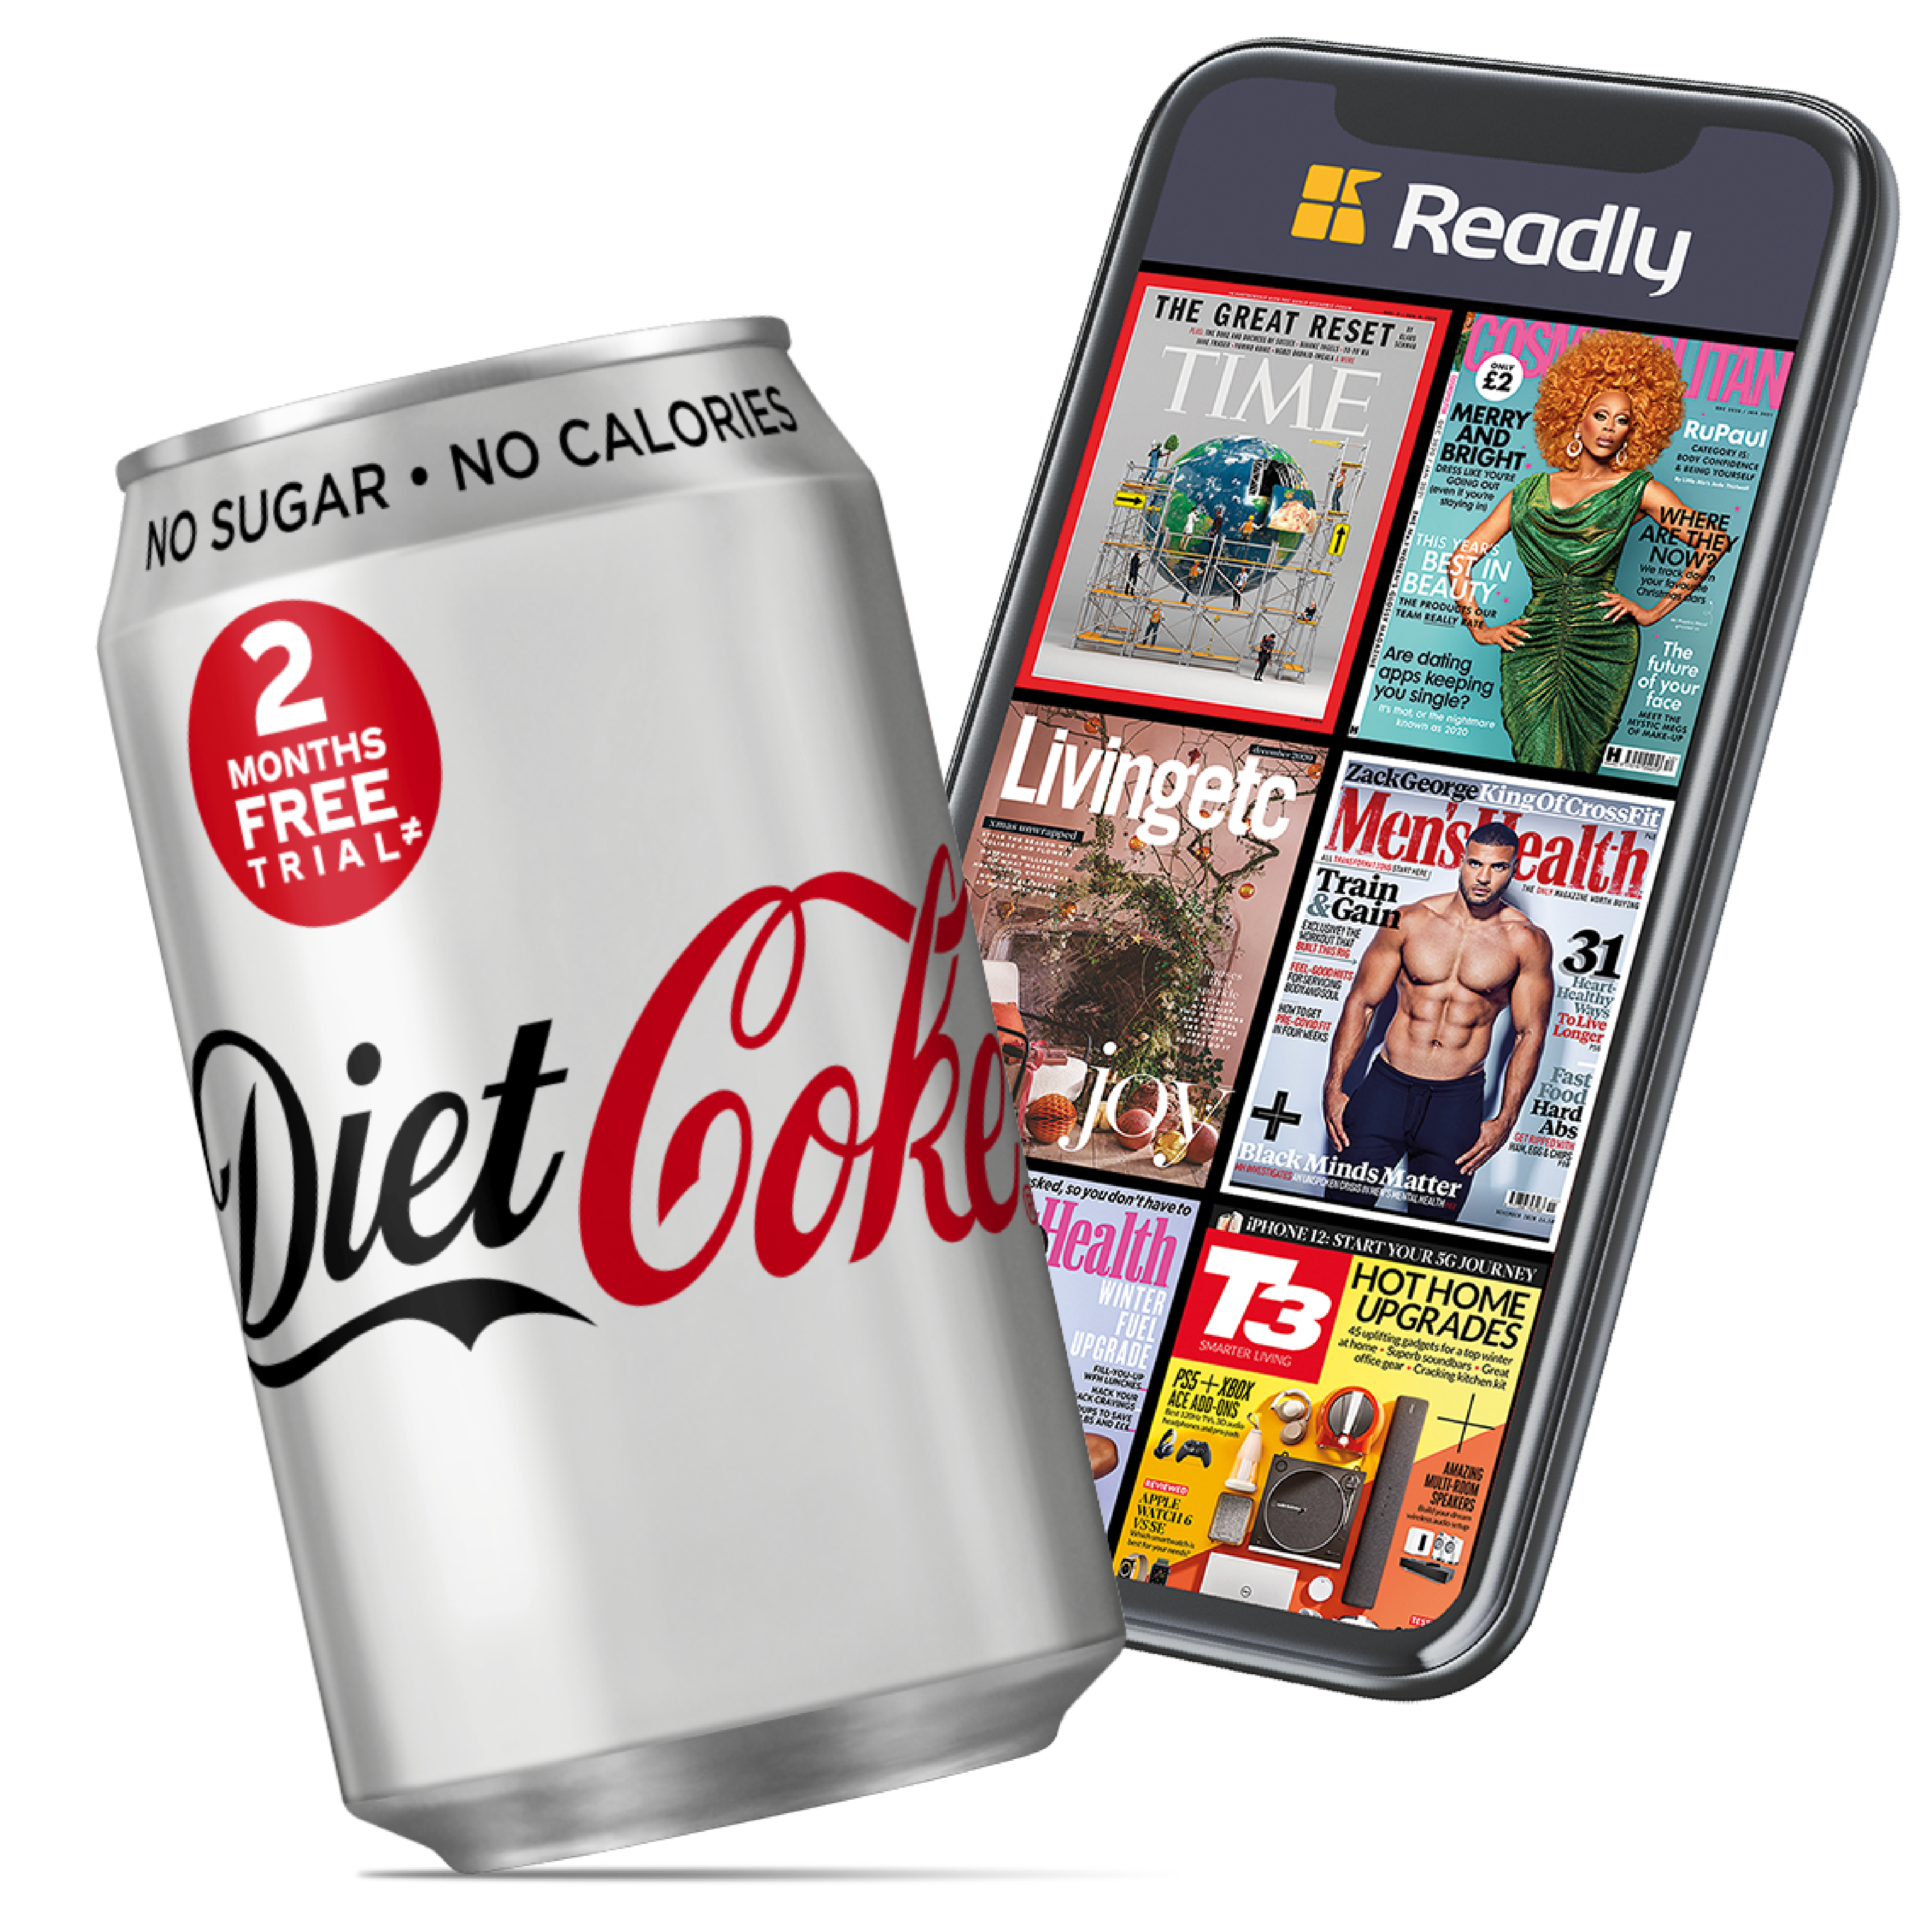 Diet Coke teams up with Readly for on-pack promotion